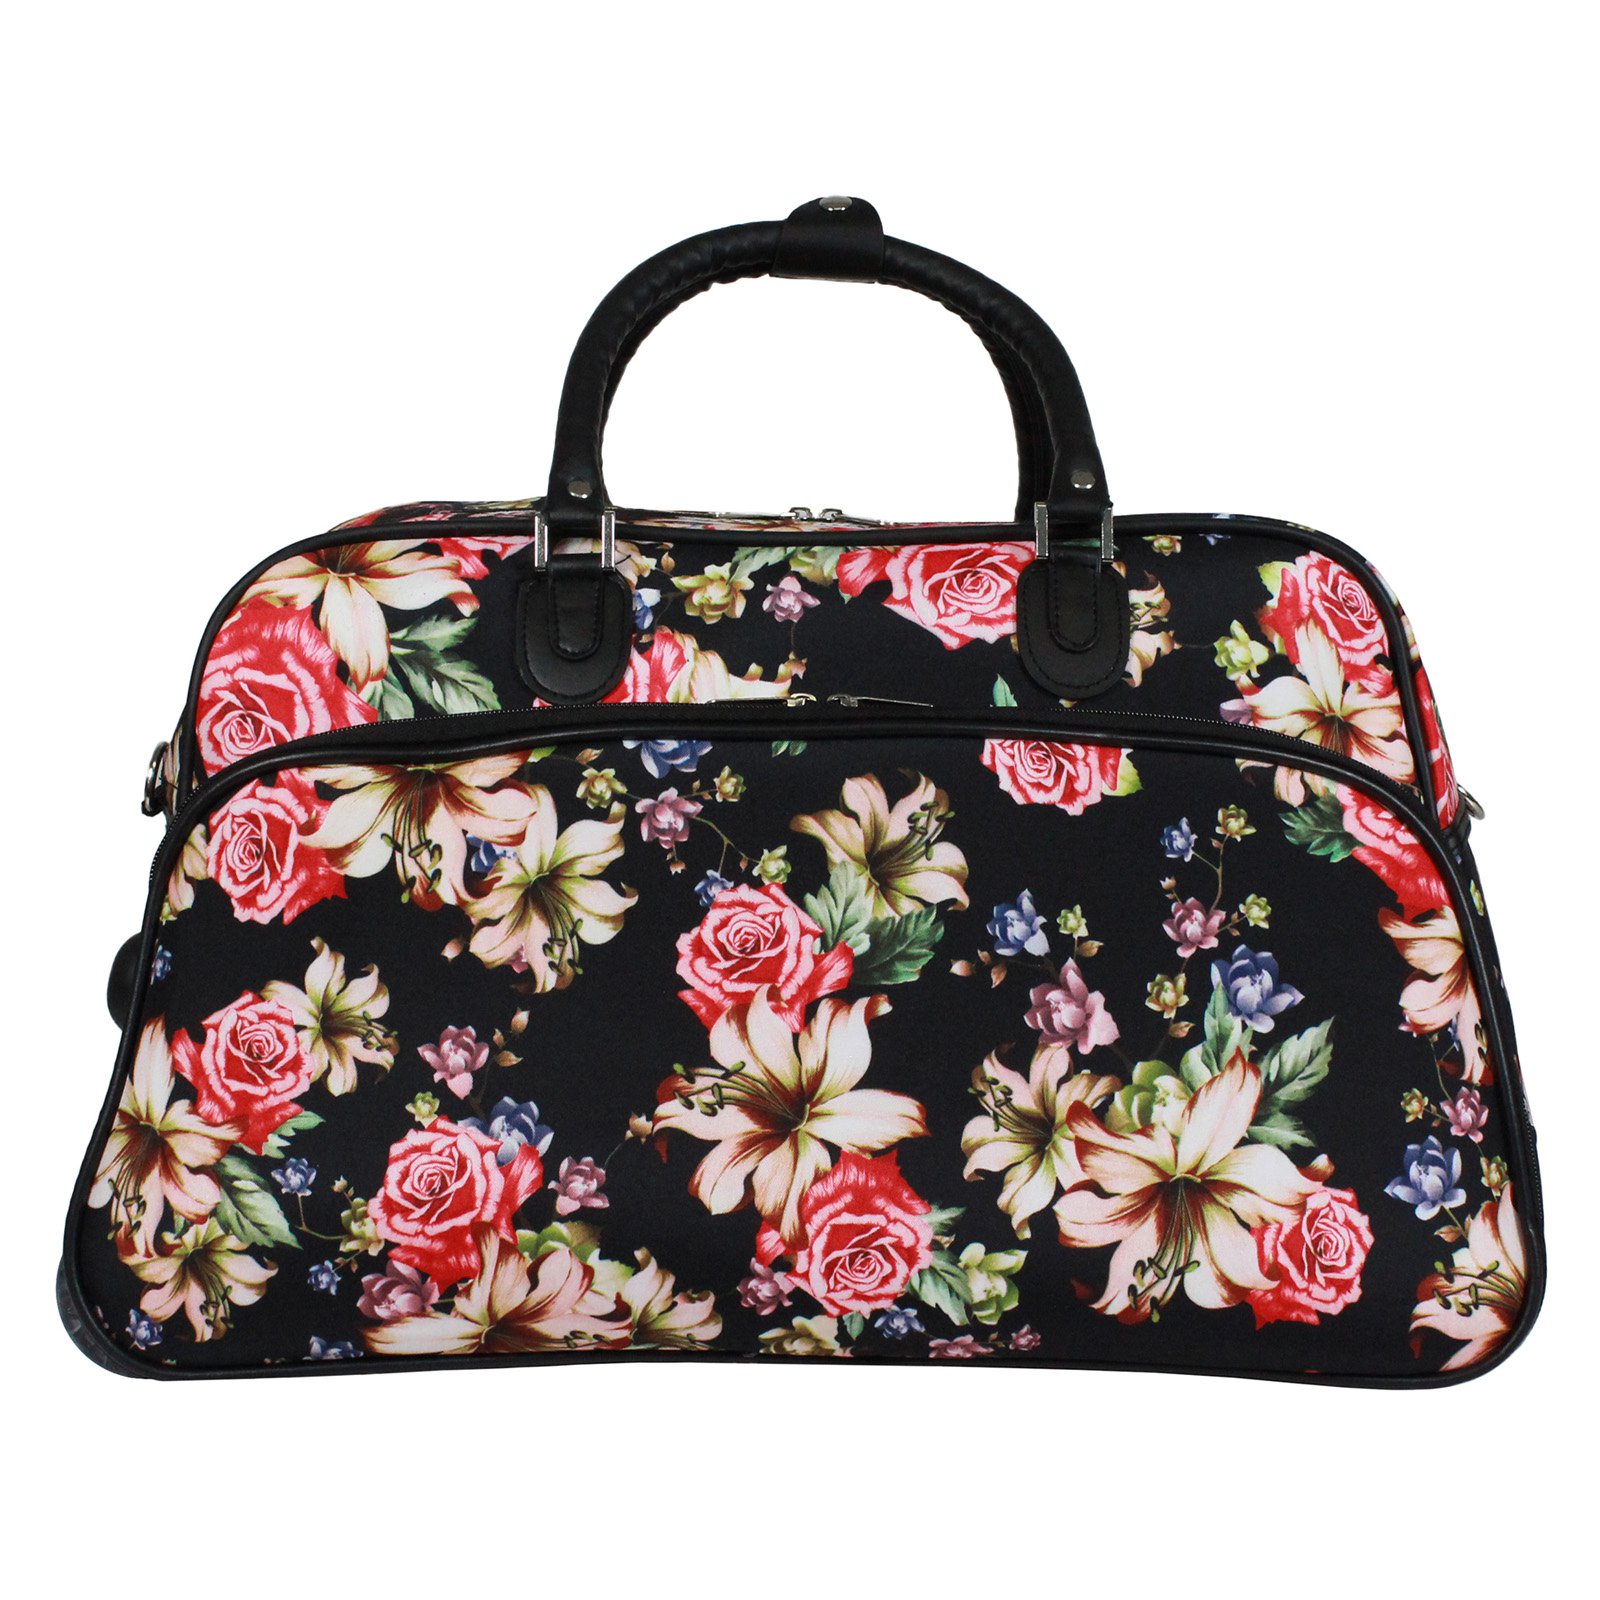 World Traveler 21-Inch Carry-On Rolling Duffel Bag - Rose Lily - image 2 of 4